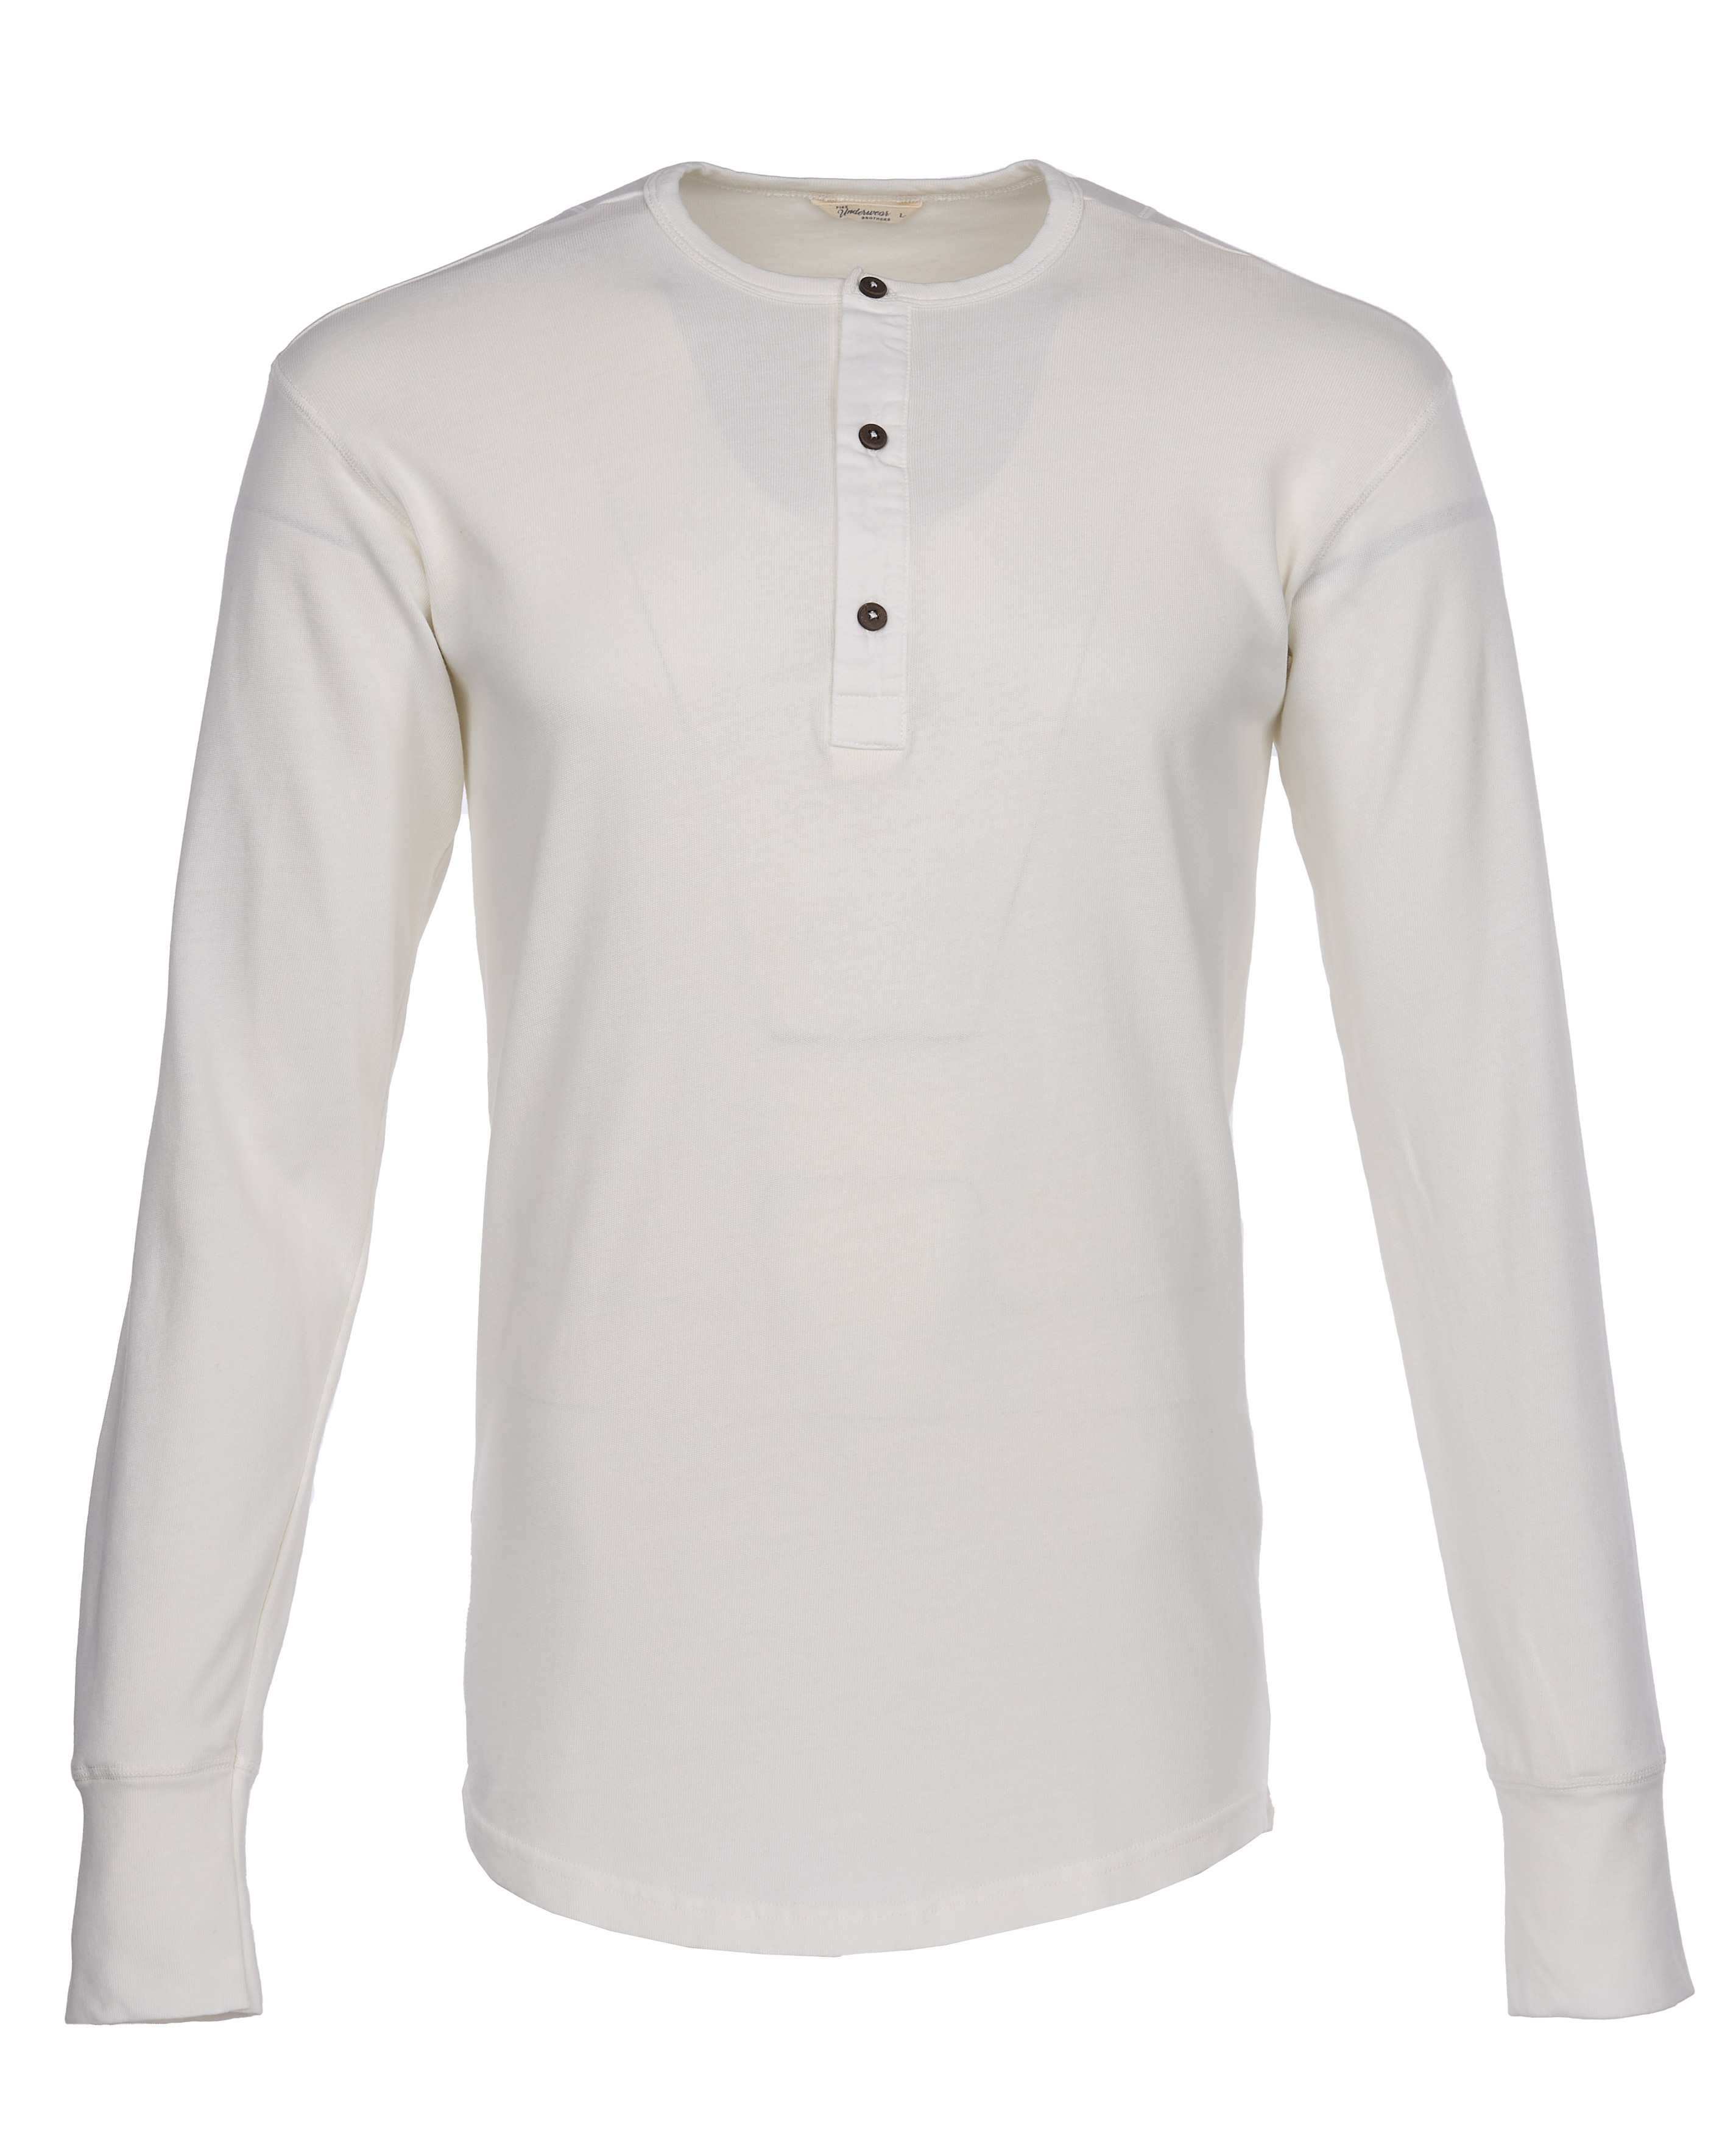 Buy Brown Long Sleeve Henley Top 14, T-shirts